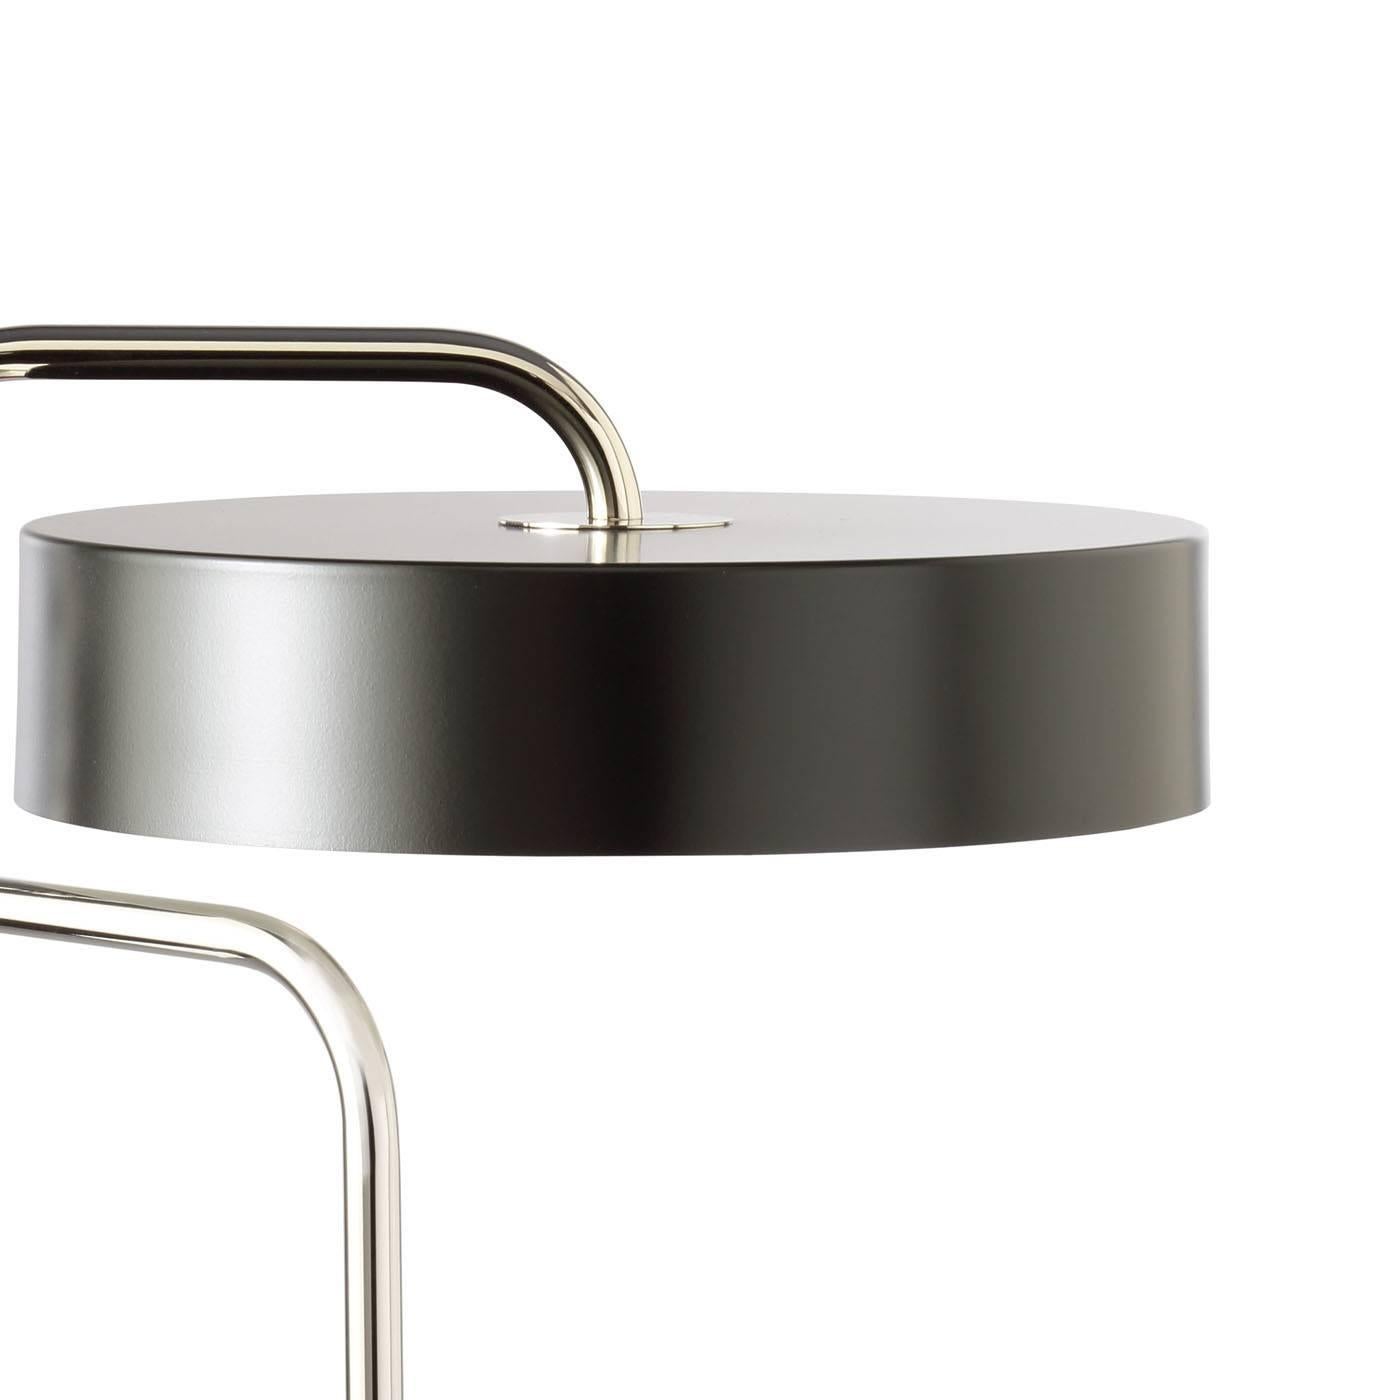 This striking desk lamp is entirely made in metal with a nickel finish and paired with a metal shade painted in a darker tone. This subtle color variation adds elegance to the contemporary silhouette of this piece that features a small round base